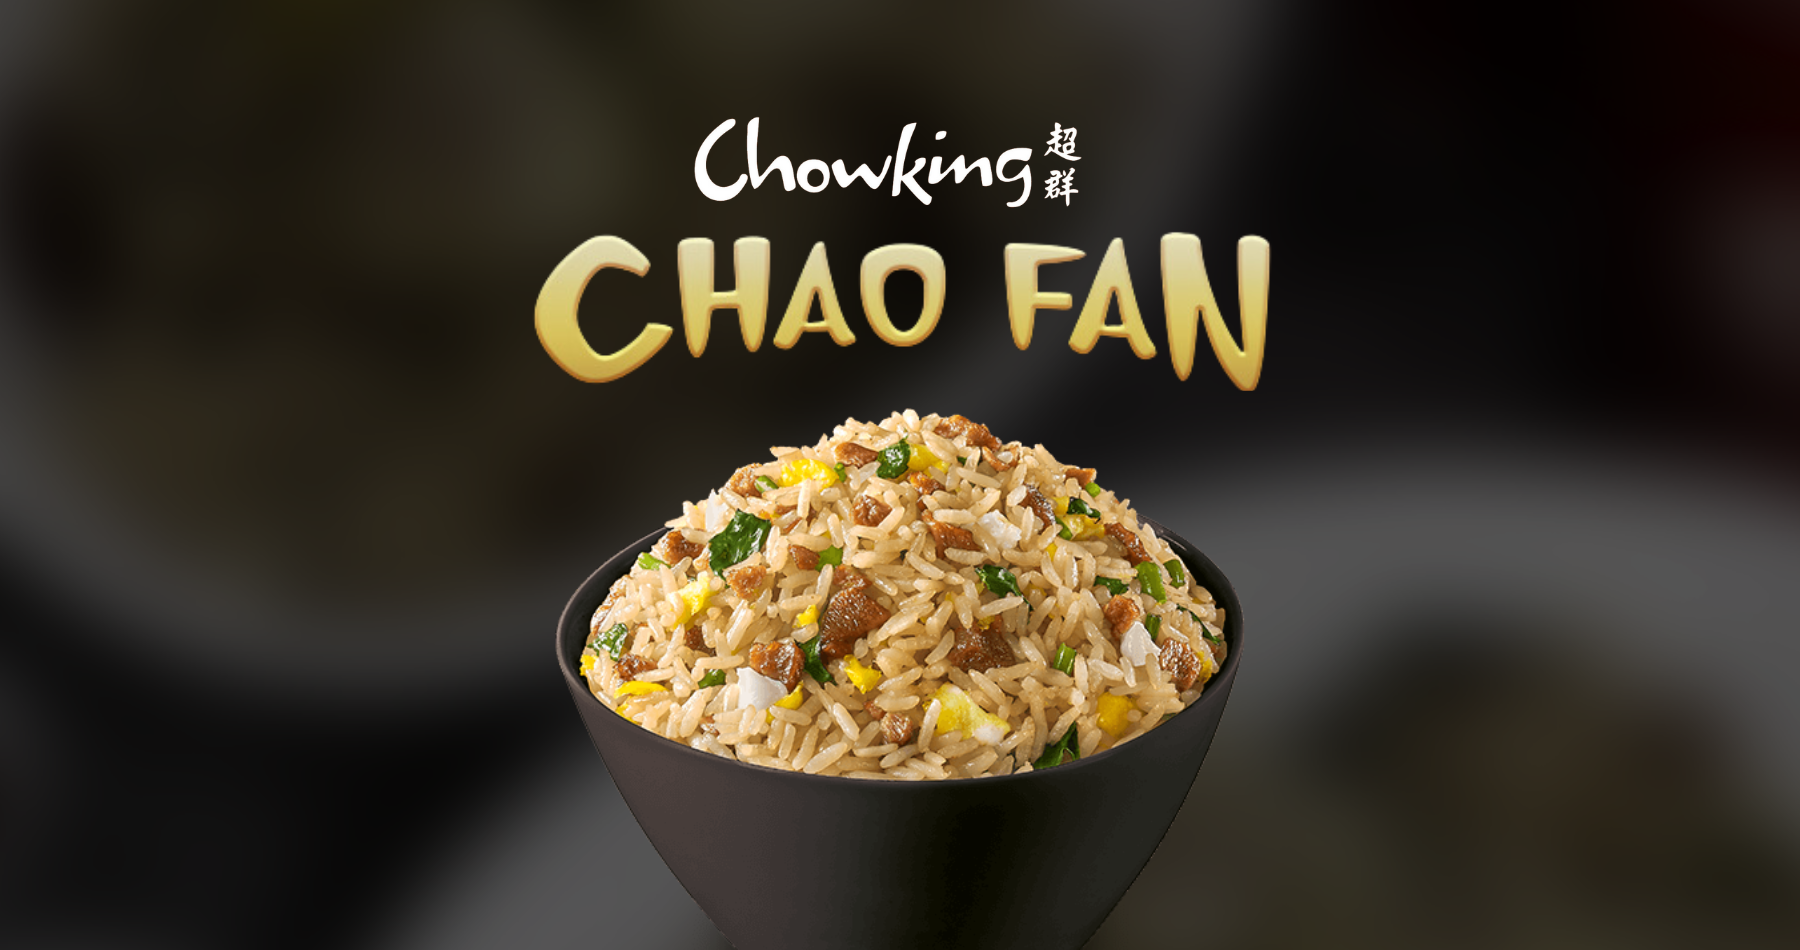 Timeless classics Pork Chao Fan & Beef Chao Fan are launched